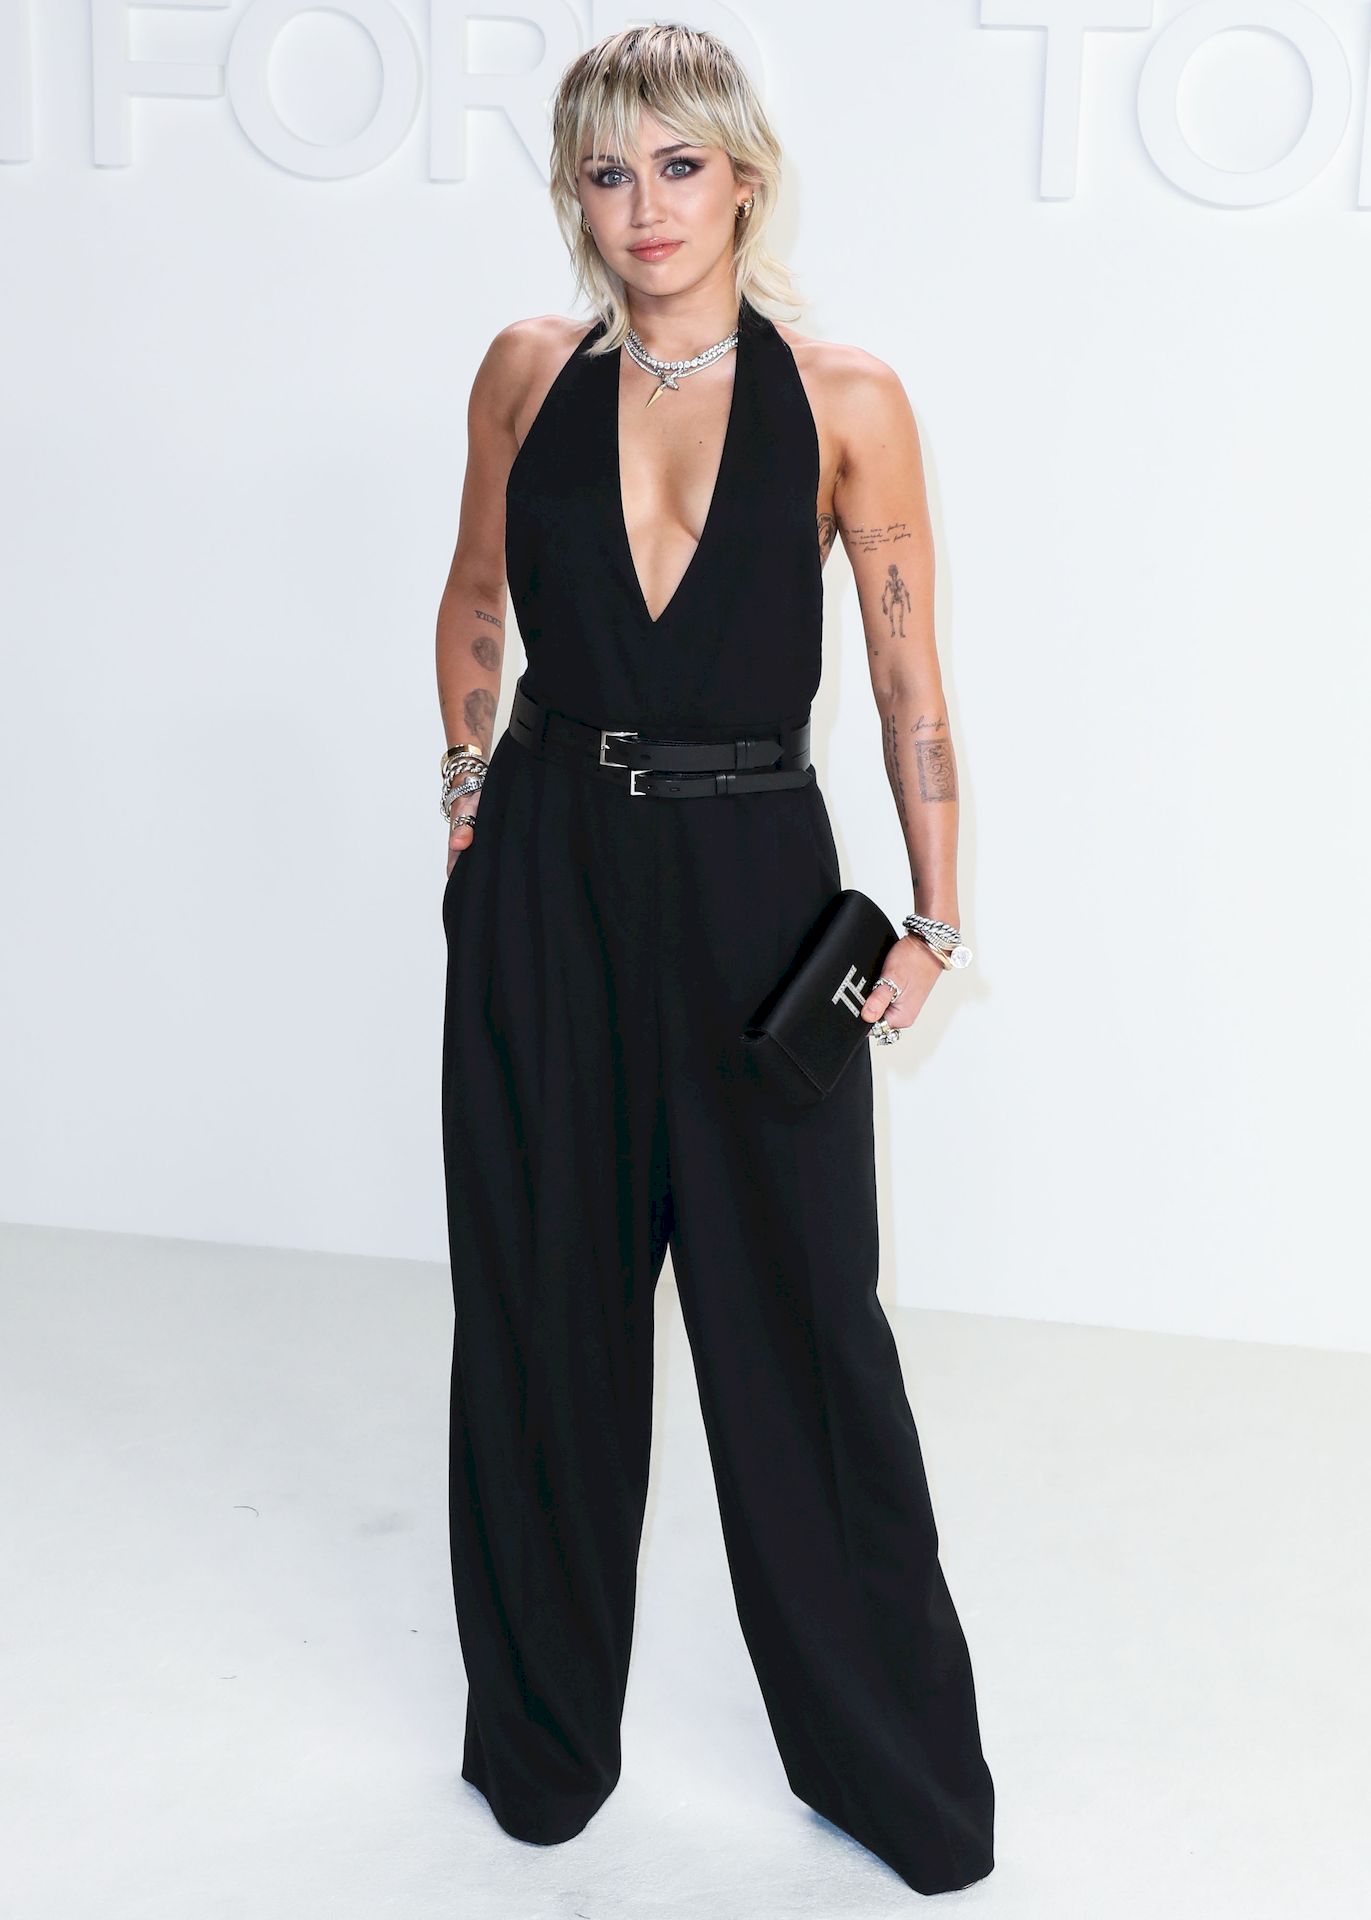 Miley-Cyrus-Looks-Sexy-at-the-Tom-Ford-Autumn_Winter-2020-Fashion-Show-0079.jpg